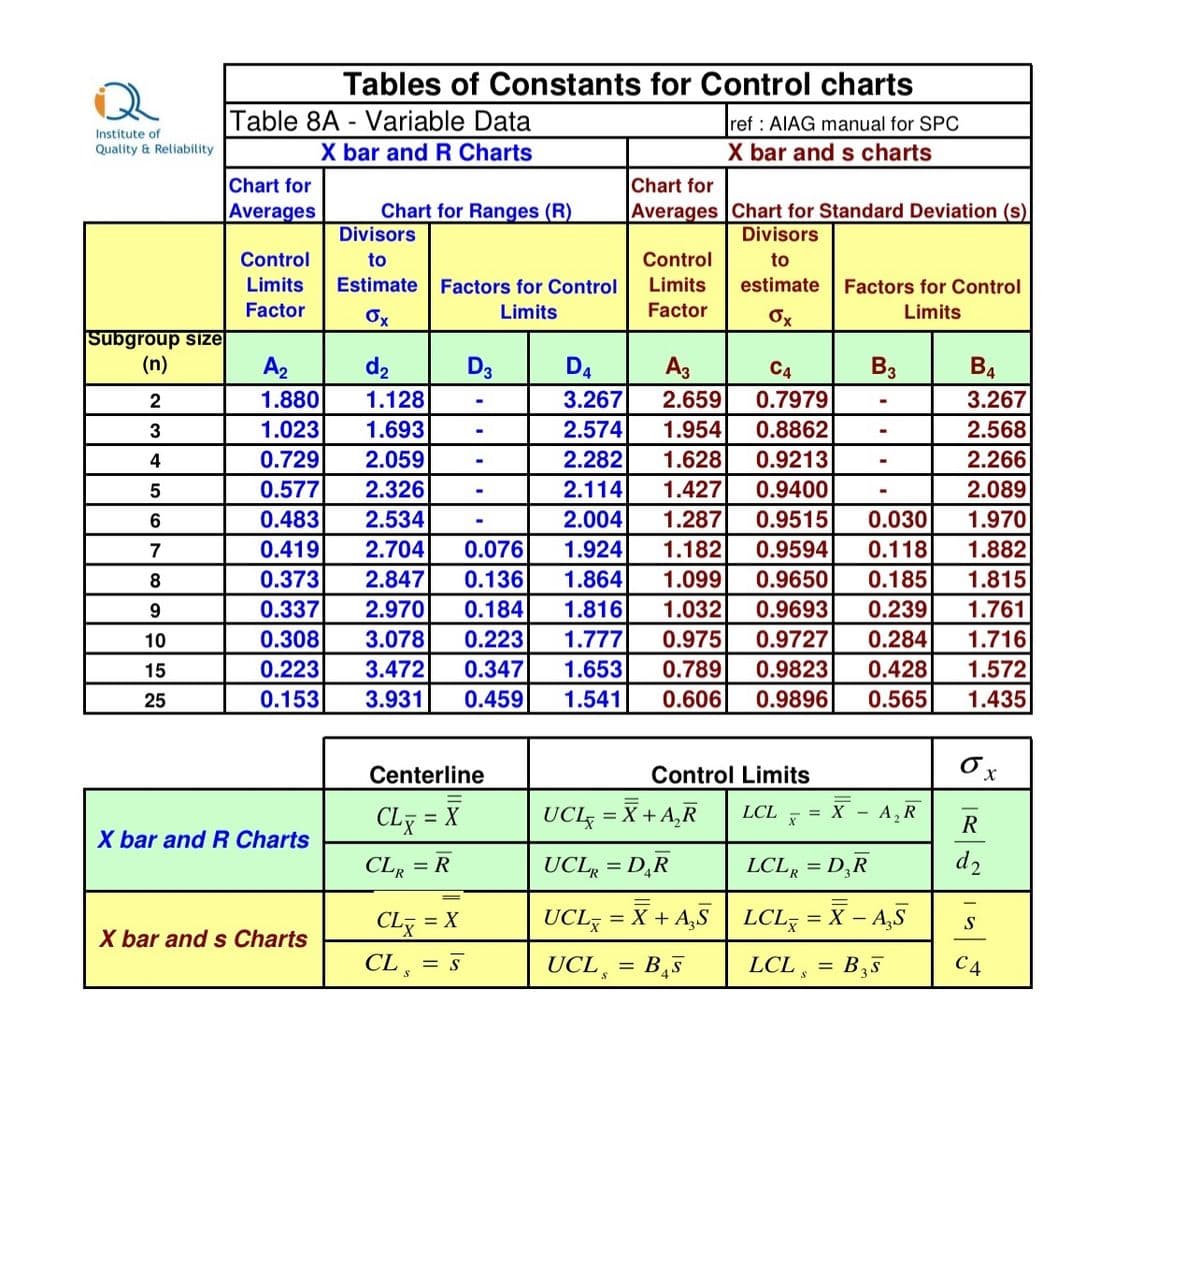 Institute of
Quality & Reliability
Subgroup size
(n)
2
3
4
5
6
7
8
9
10
15
25
Table 8A - Variable Data
X bar and R Charts
Chart for
Averages
Control
Limits
Factor
Tables of Constants for Control charts
ref: AIAG manual for SPC
X bar and s charts
X bar and R Charts
X bar and s Charts
Chart for Ranges (R)
A₂
d₂
1.880
1.128
1.023 1.693
0.729
2.059
0.577
2.326
0.483
2.534
0.419
2.704
0.076
0.373
2.847 0.136
0.337
2.970
0.184
0.308 3.078
0.223
3.472
0.153 3.931
Divisors
to
Estimate Factors for Control
Limits
Ox
= X
D3
CLX = X
CL S = S
-
-
-
Centerline
CLx =
CLR = R
0.223
0.347
0.459
Chart for
Averages Chart for Standard Deviation (s)
Divisors
to
Control
Limits
Factor
D4
A3
3.267
2.659
2.574
1.954
2.282
1.628
2.114 1.427
2.004 1.287
1.924
1.864
1.816
1.777
1.653
1.541
estimate Factors for Control
ox
Limits
C4
B4
0.7979
3.267
0.8862
2.568
0.9213
2.266
0.9400
2.089
0.9515
0.030
1.970
1.182 0.9594
0.118
1.882
1.099 0.9650
0.185 1.815
1.032 0.9693
0.239
1.761
0.975 0.9727
0.284
0.789 0.9823
0.428
0.606 0.9896 0.565
Control Limits
UCL =
UCLR=D&R
UCL = X + A₂S
UCL, = BAS
=X+A₂R
B3
LCL = X - A₂ R
X
LCLR = D₂R
LCLX = X - A₂S
LCL, = B35
1.716
1.572
1.435
6 x
R
d2
S
C4